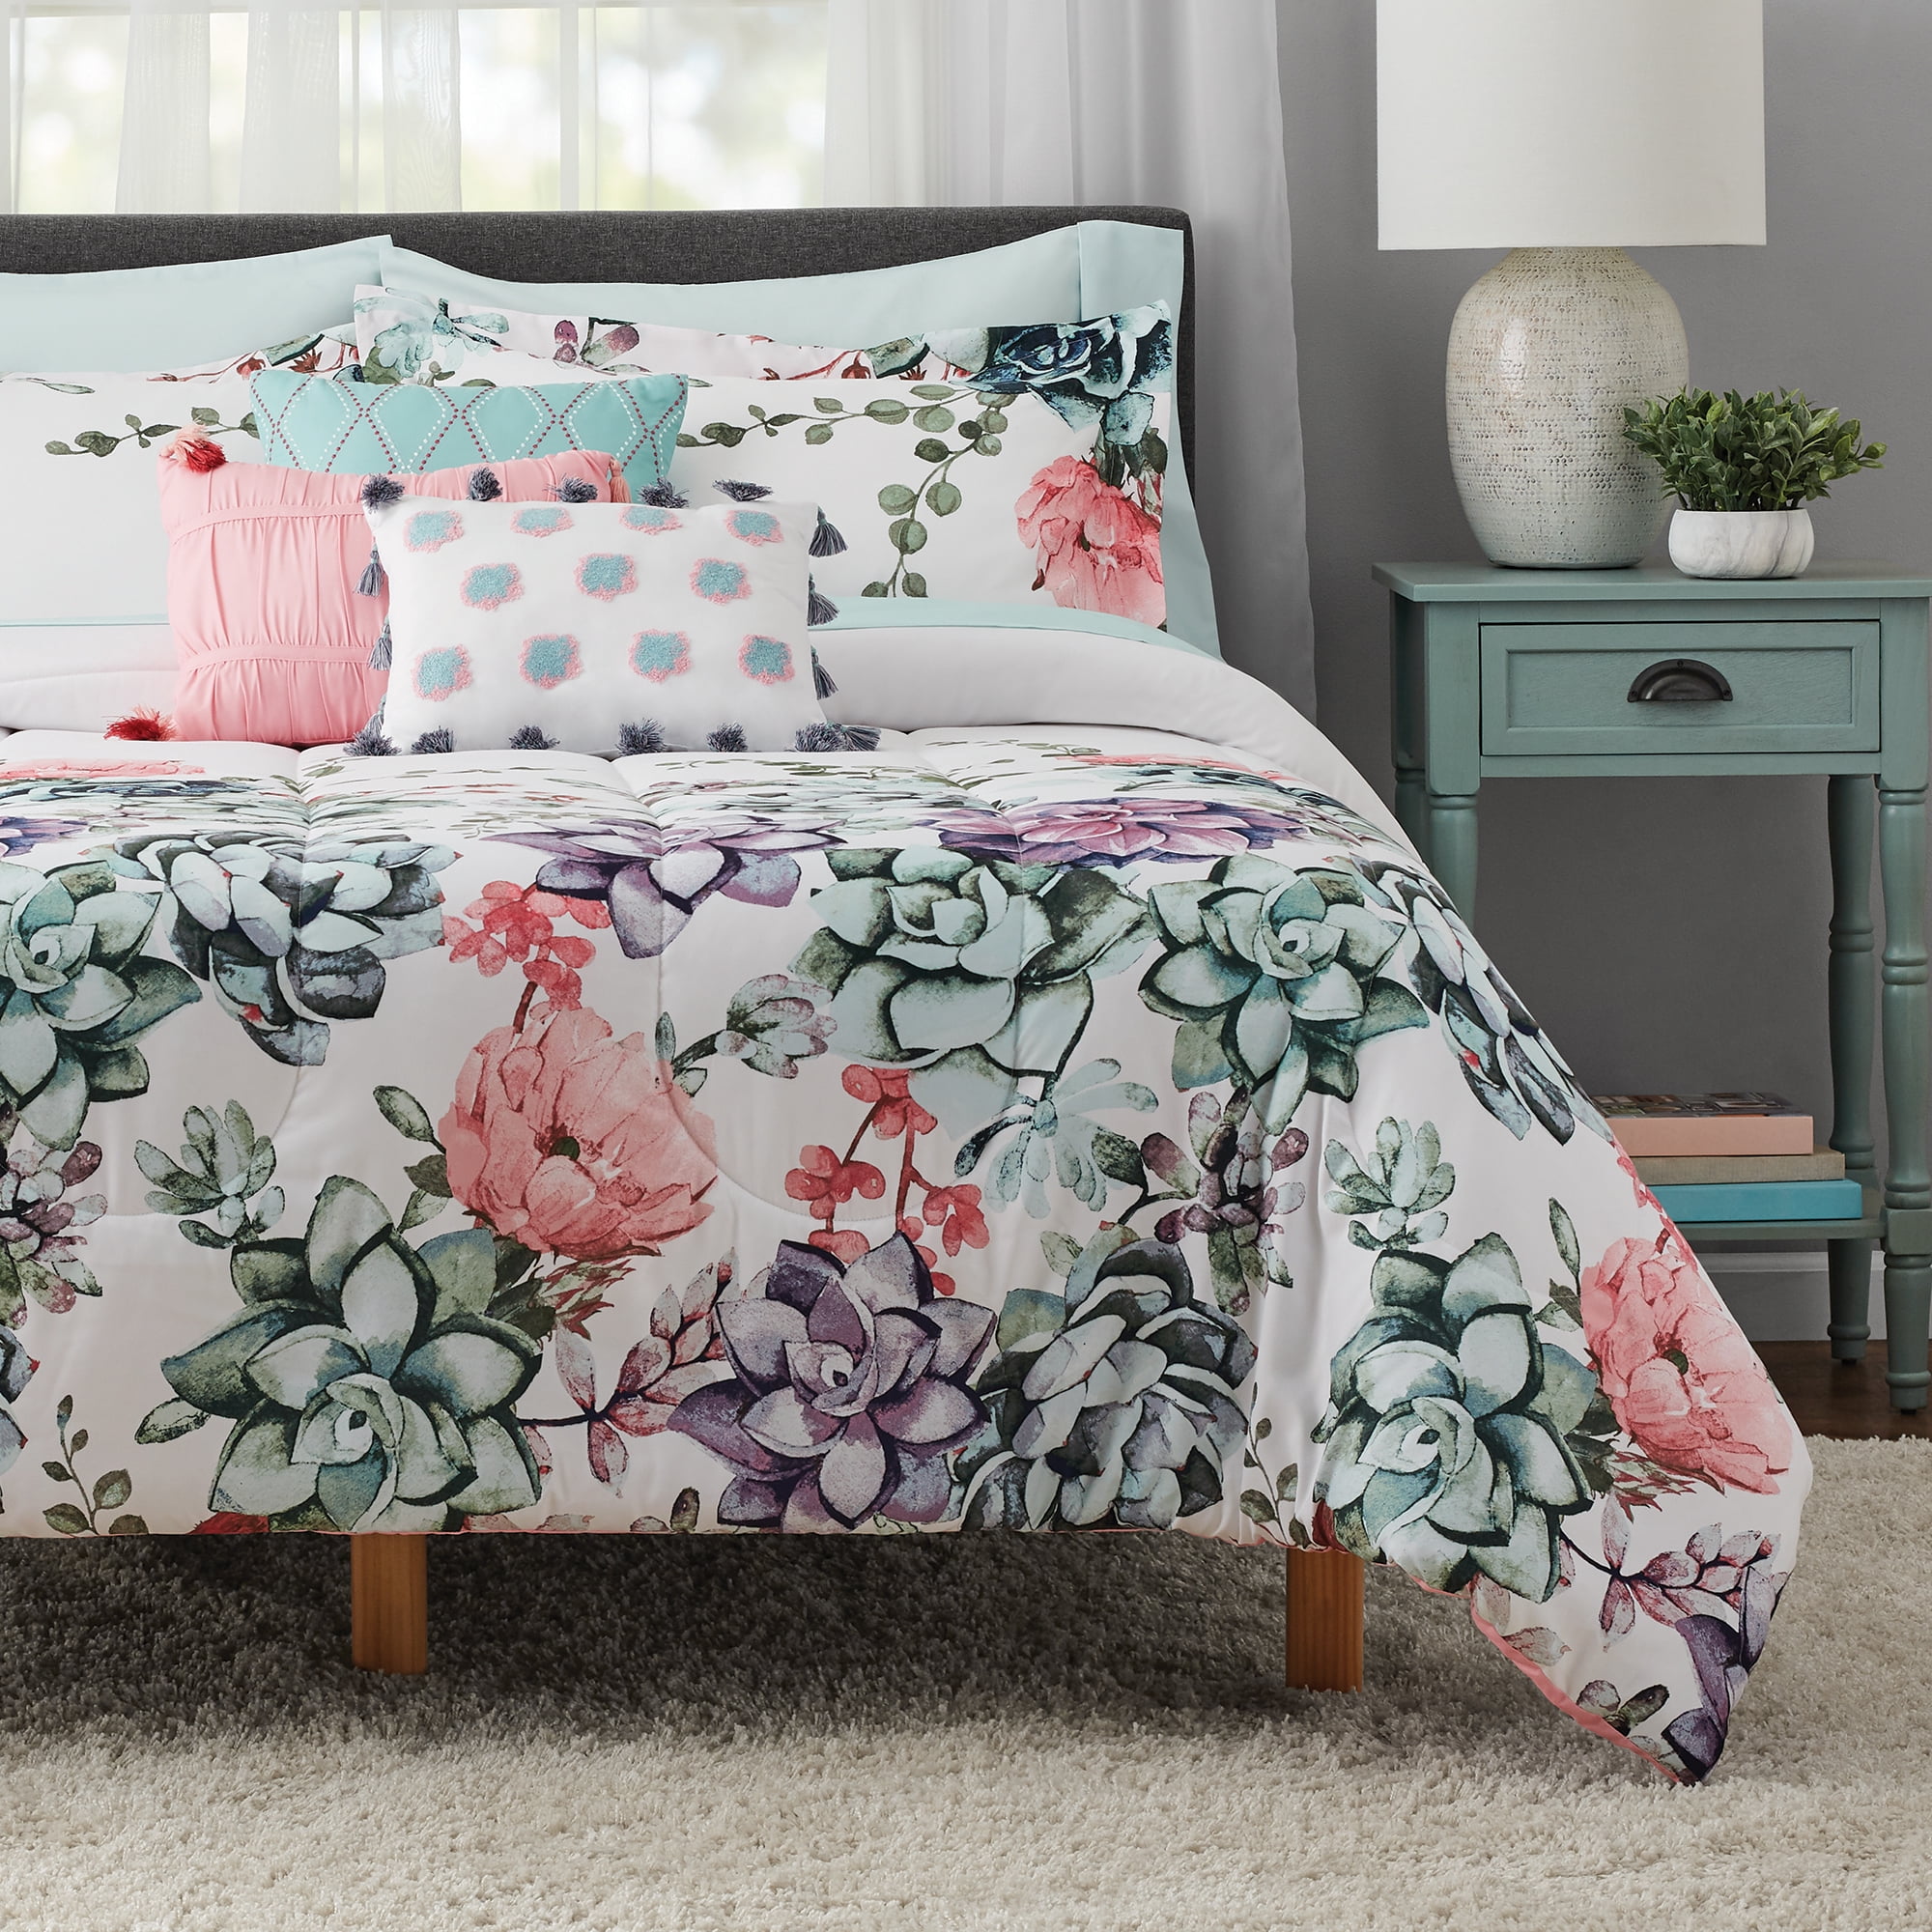 Mainstays White Floral 10 Piece Bed in a Bag Comforter Set with Sheets, Queen